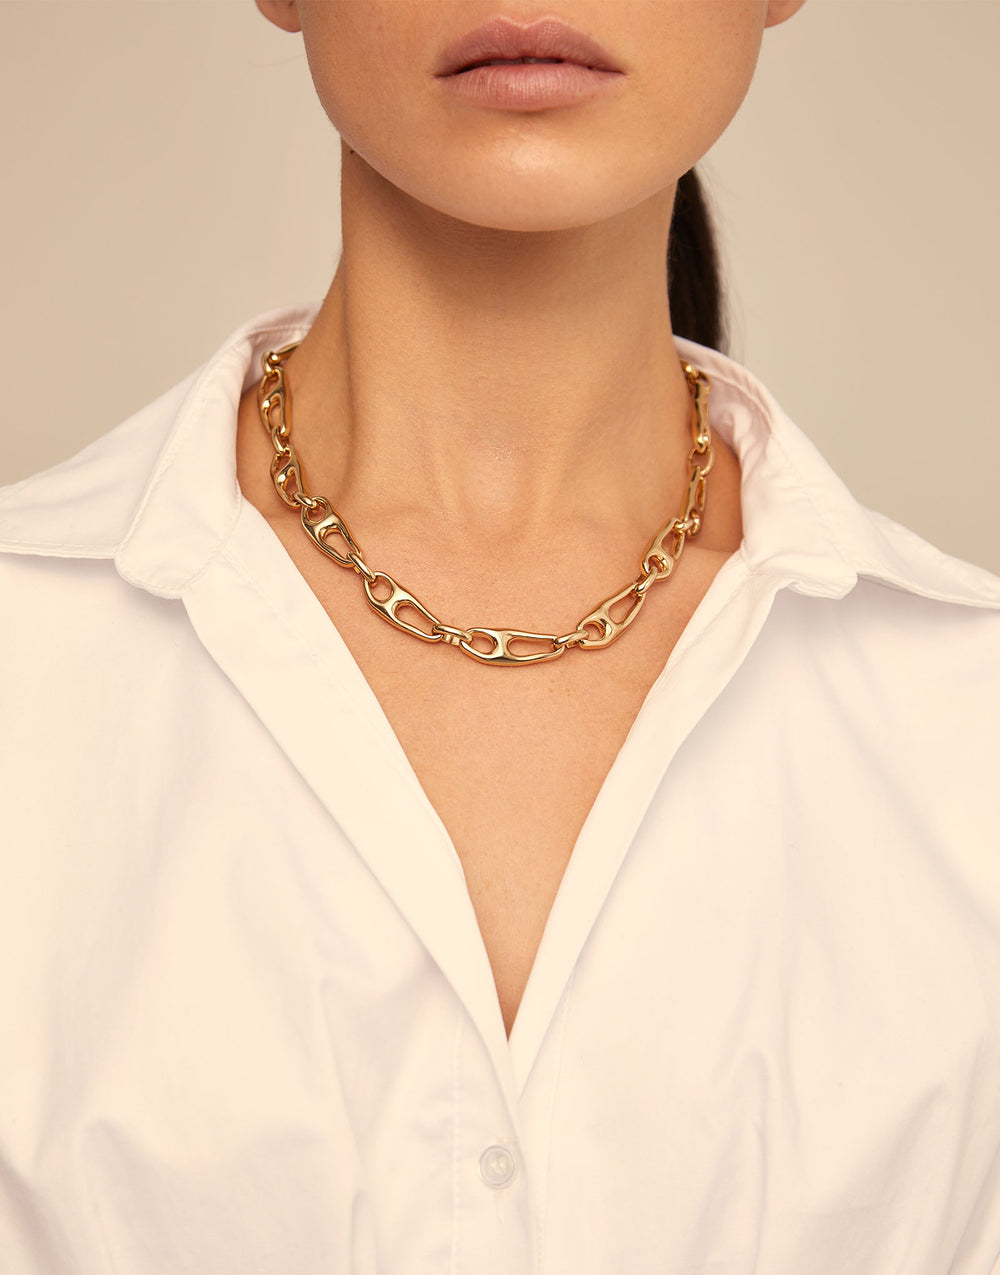 UNO de 50 |  Be the only one Necklace